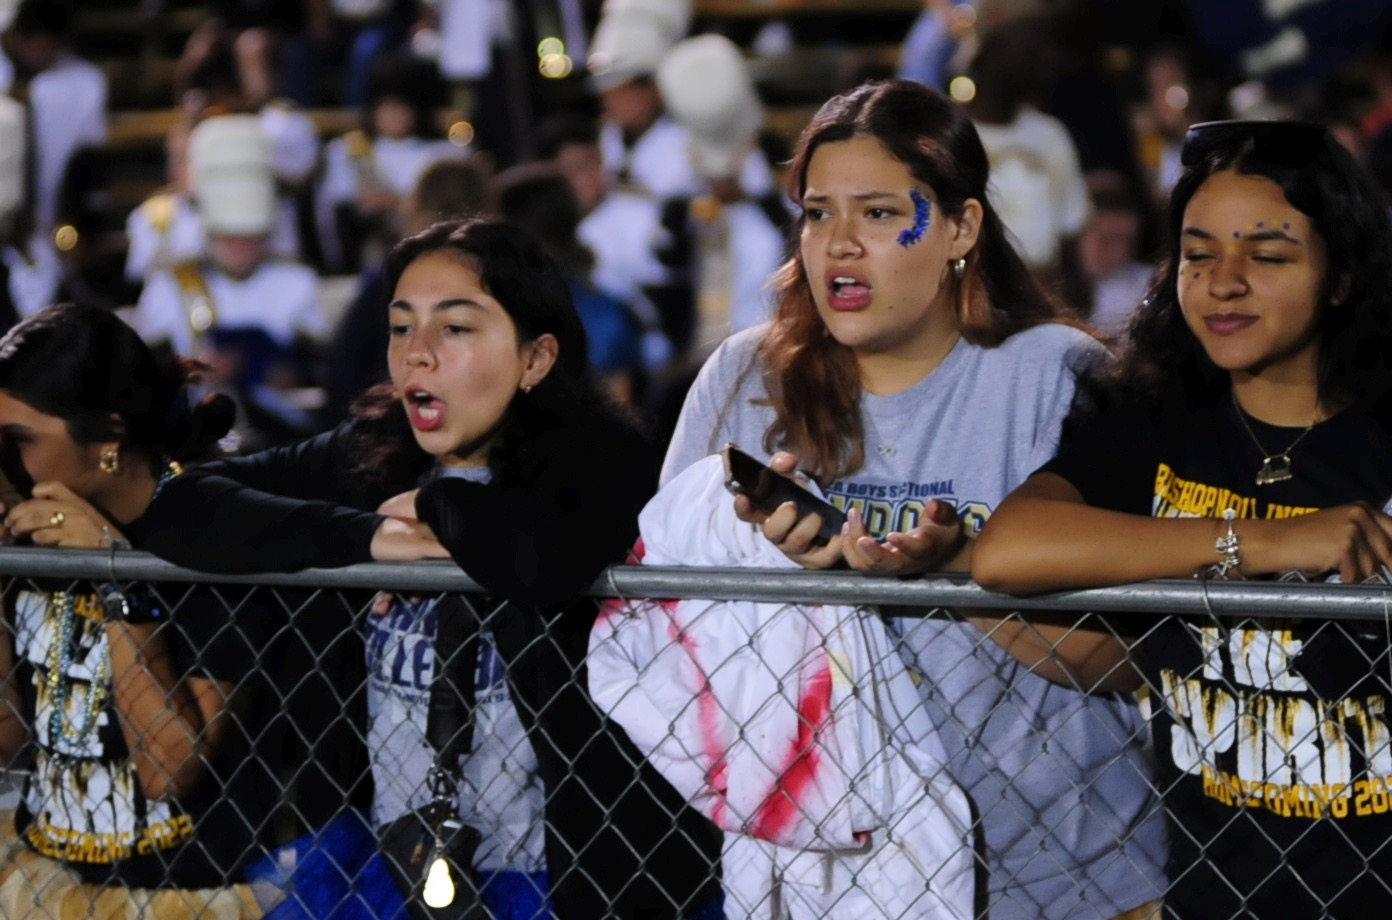 Groaning as Mr. Kevin Smith, guidance counselor, purposely stalls in announcing the name of the Homecoming queen,seniors Juliette Ortiz, Naomi Quiroz, and Aleni Vasquez grow eager to see who is crowned at the BNI Homecoming game against Lake Station on Sept. 16.“We were growing impatient during the excitement of waiting for Mr. Smith to announce the Homecoming Queen,” Vazquez said.